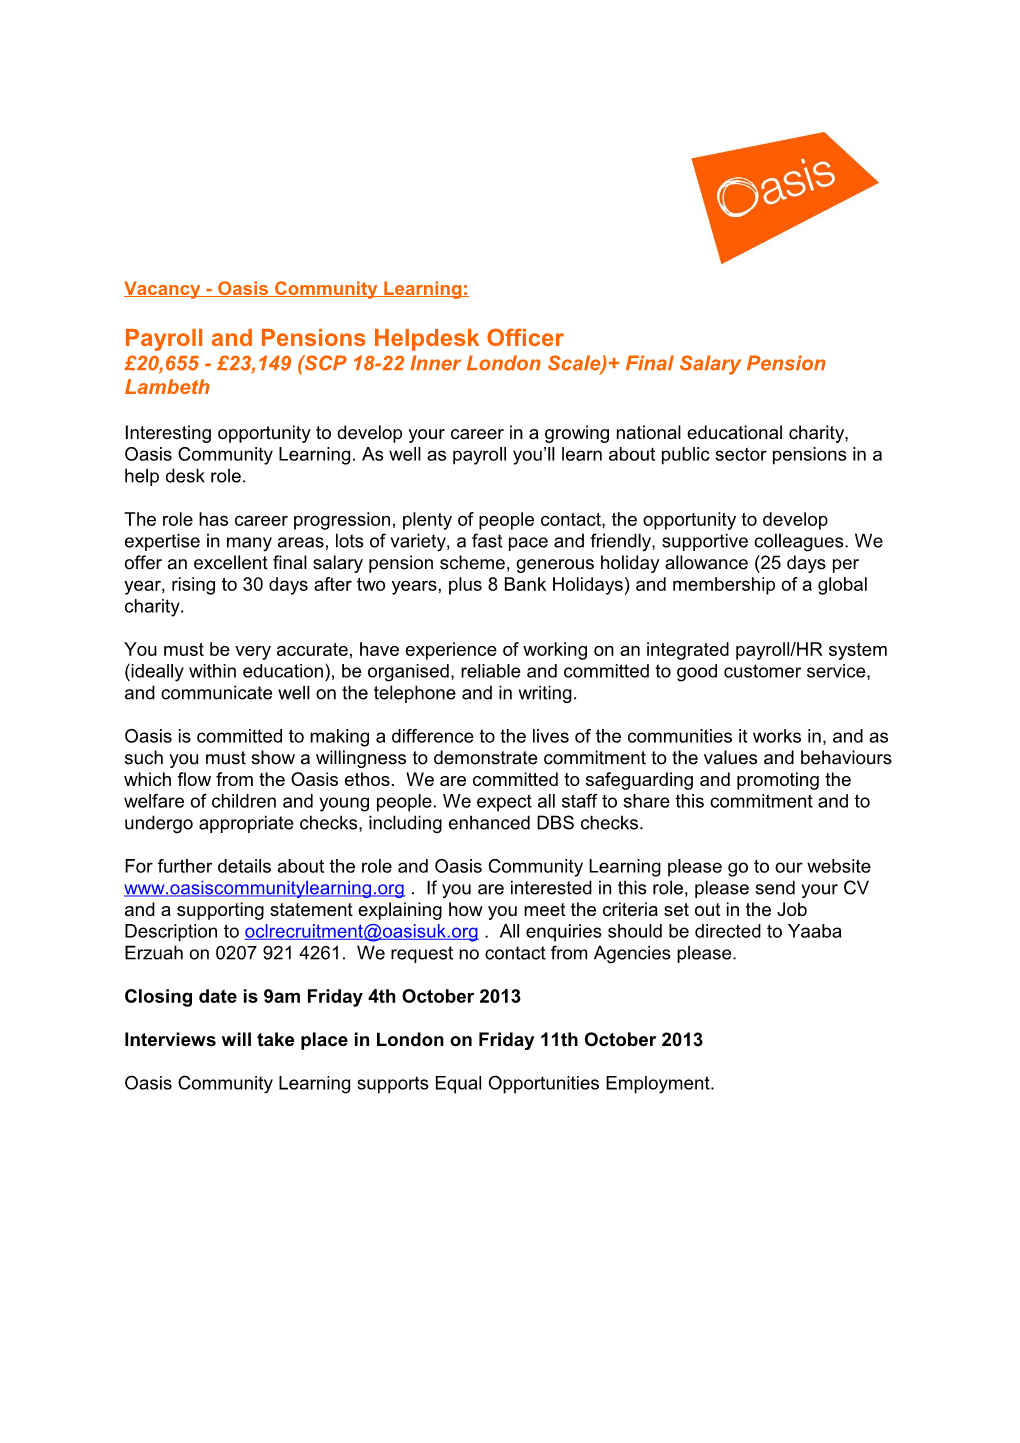 Vacancy - Oasis Community Learning